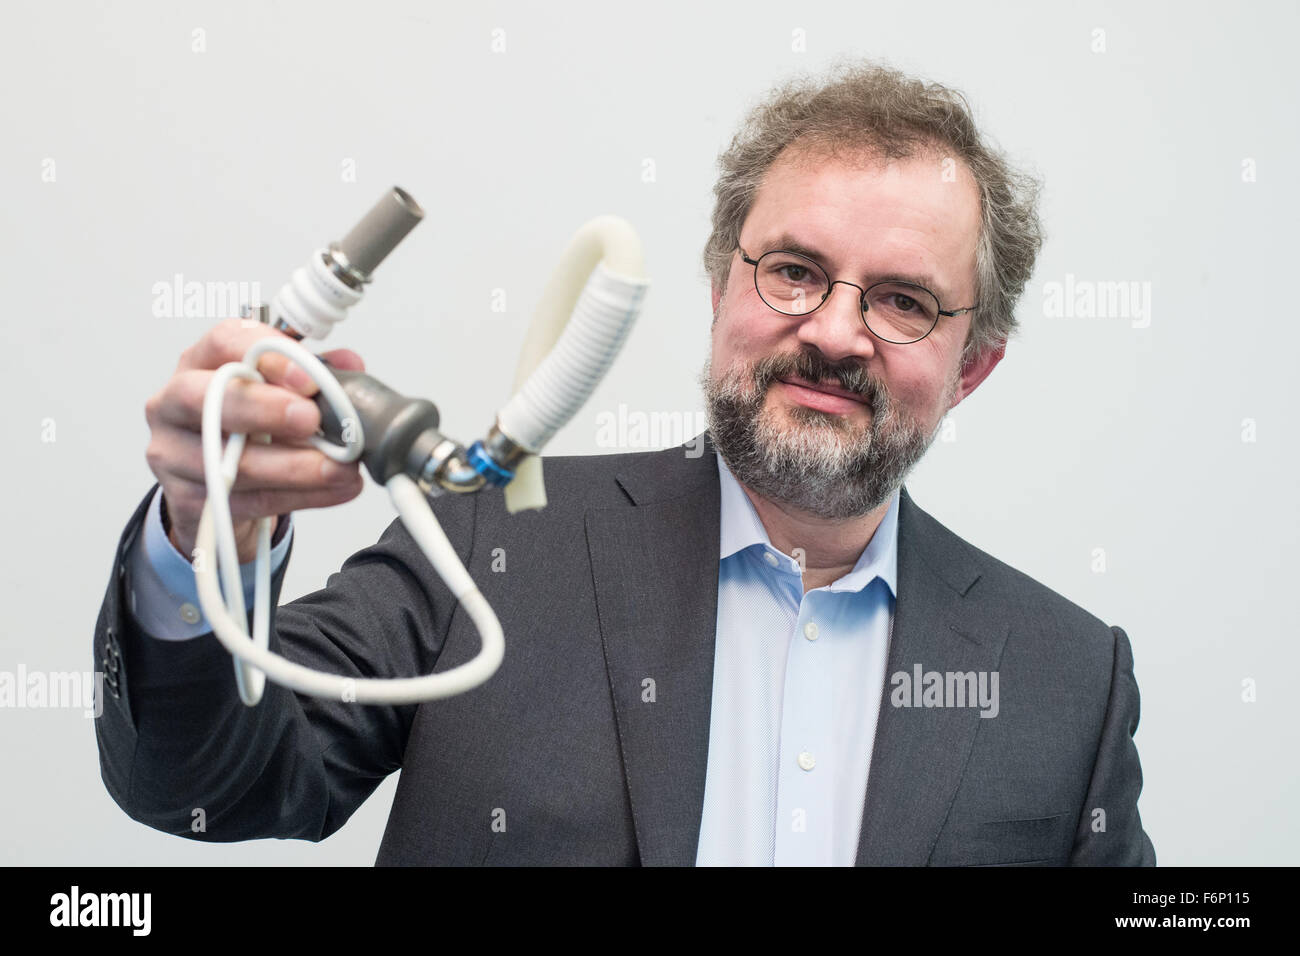 Martin Strueber from the Heart and Lung clinic at Michigan State University at a press conference in the Medical School (MHH) in Hannover (Lower Saxony), holding the ventricular assist device, 'HeartMate II' in his hand, Hannover, Germany, 18 November 2015. Strueber had installed the device inside patient Schulz in 2005 who has lived for ten years with the artificial heart, he is a according to the MHH the European record holder. Photo: OLE SPATA/dpa Stock Photo